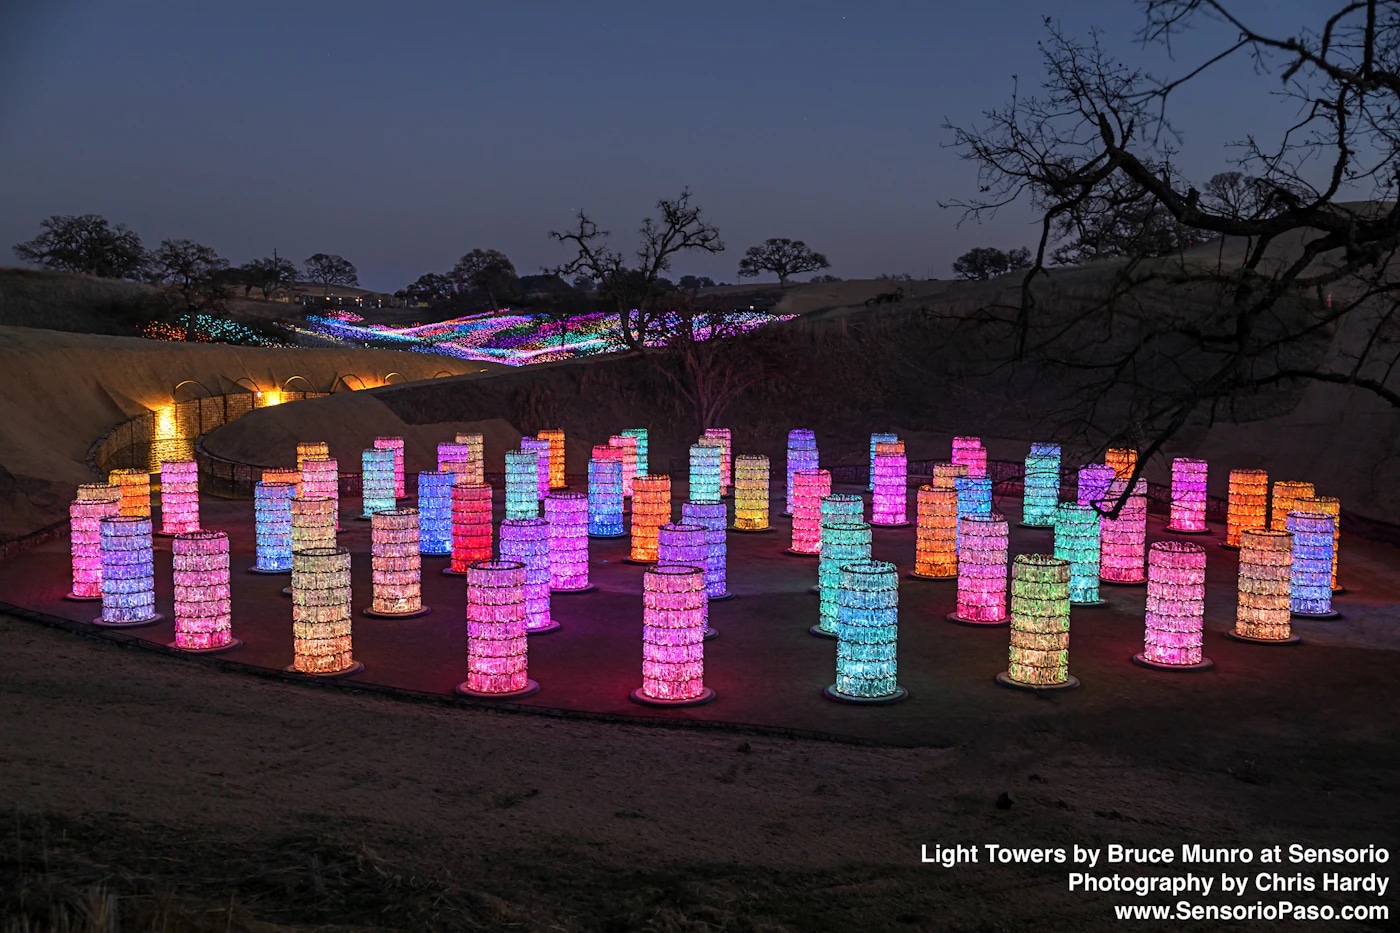 Alt Text: "Colorful light towers installation by Bruce Munro at Sensorio, lighting up the evening with a vibrant glow